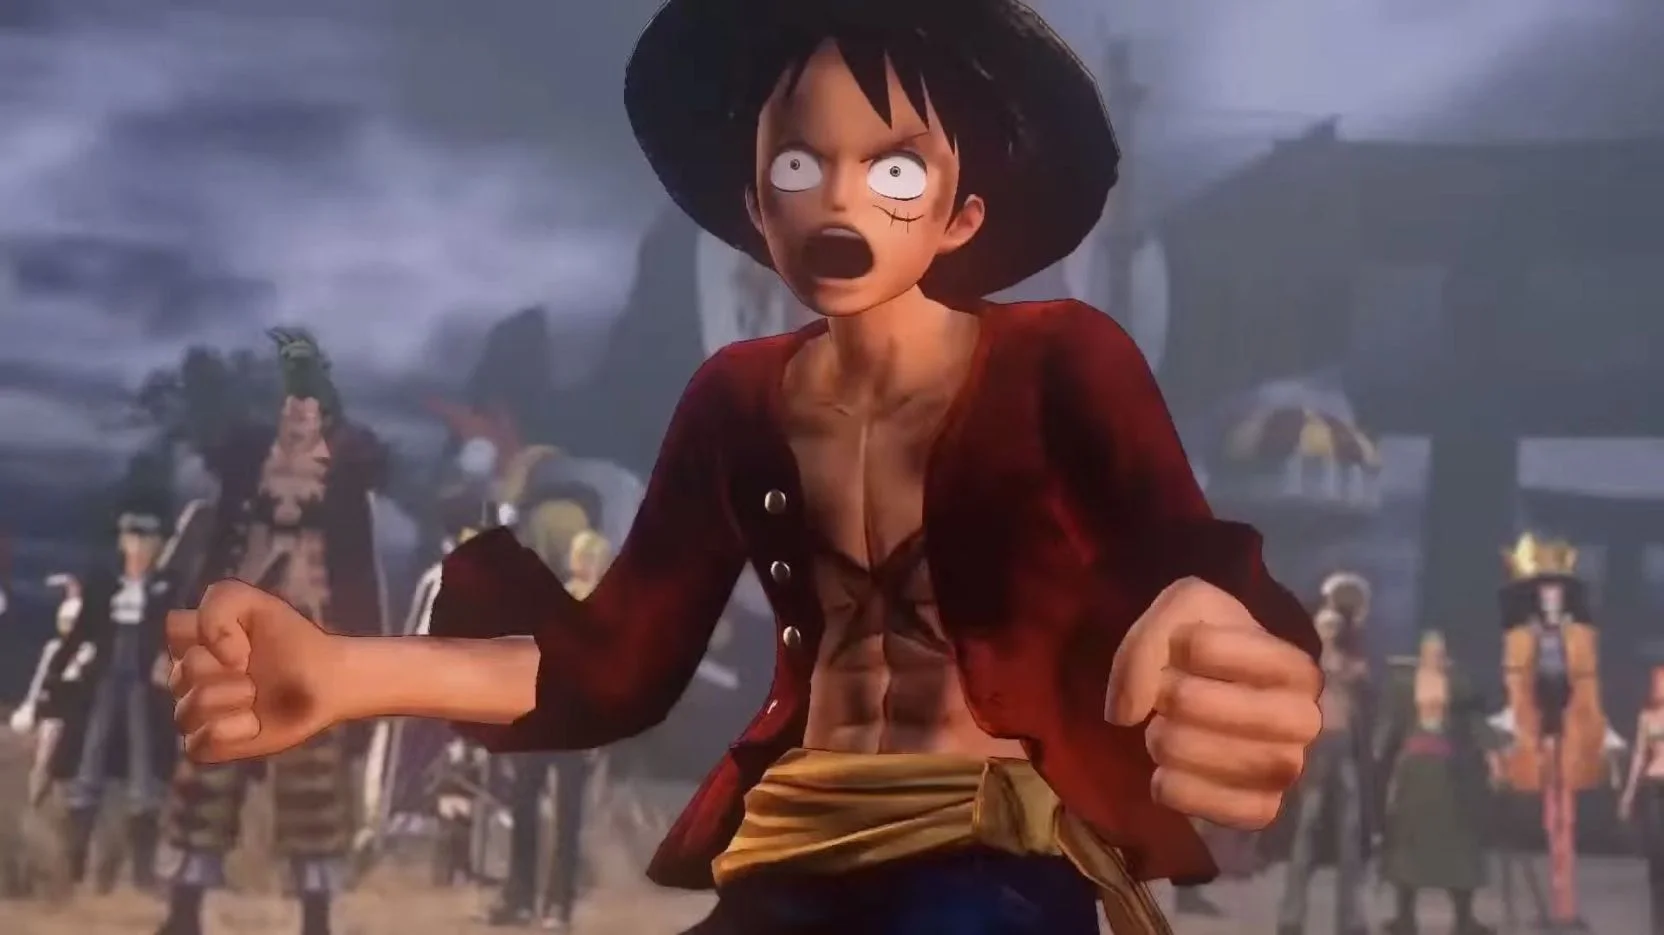 Is One Piece Pirate Warriors 4 Crossplay?